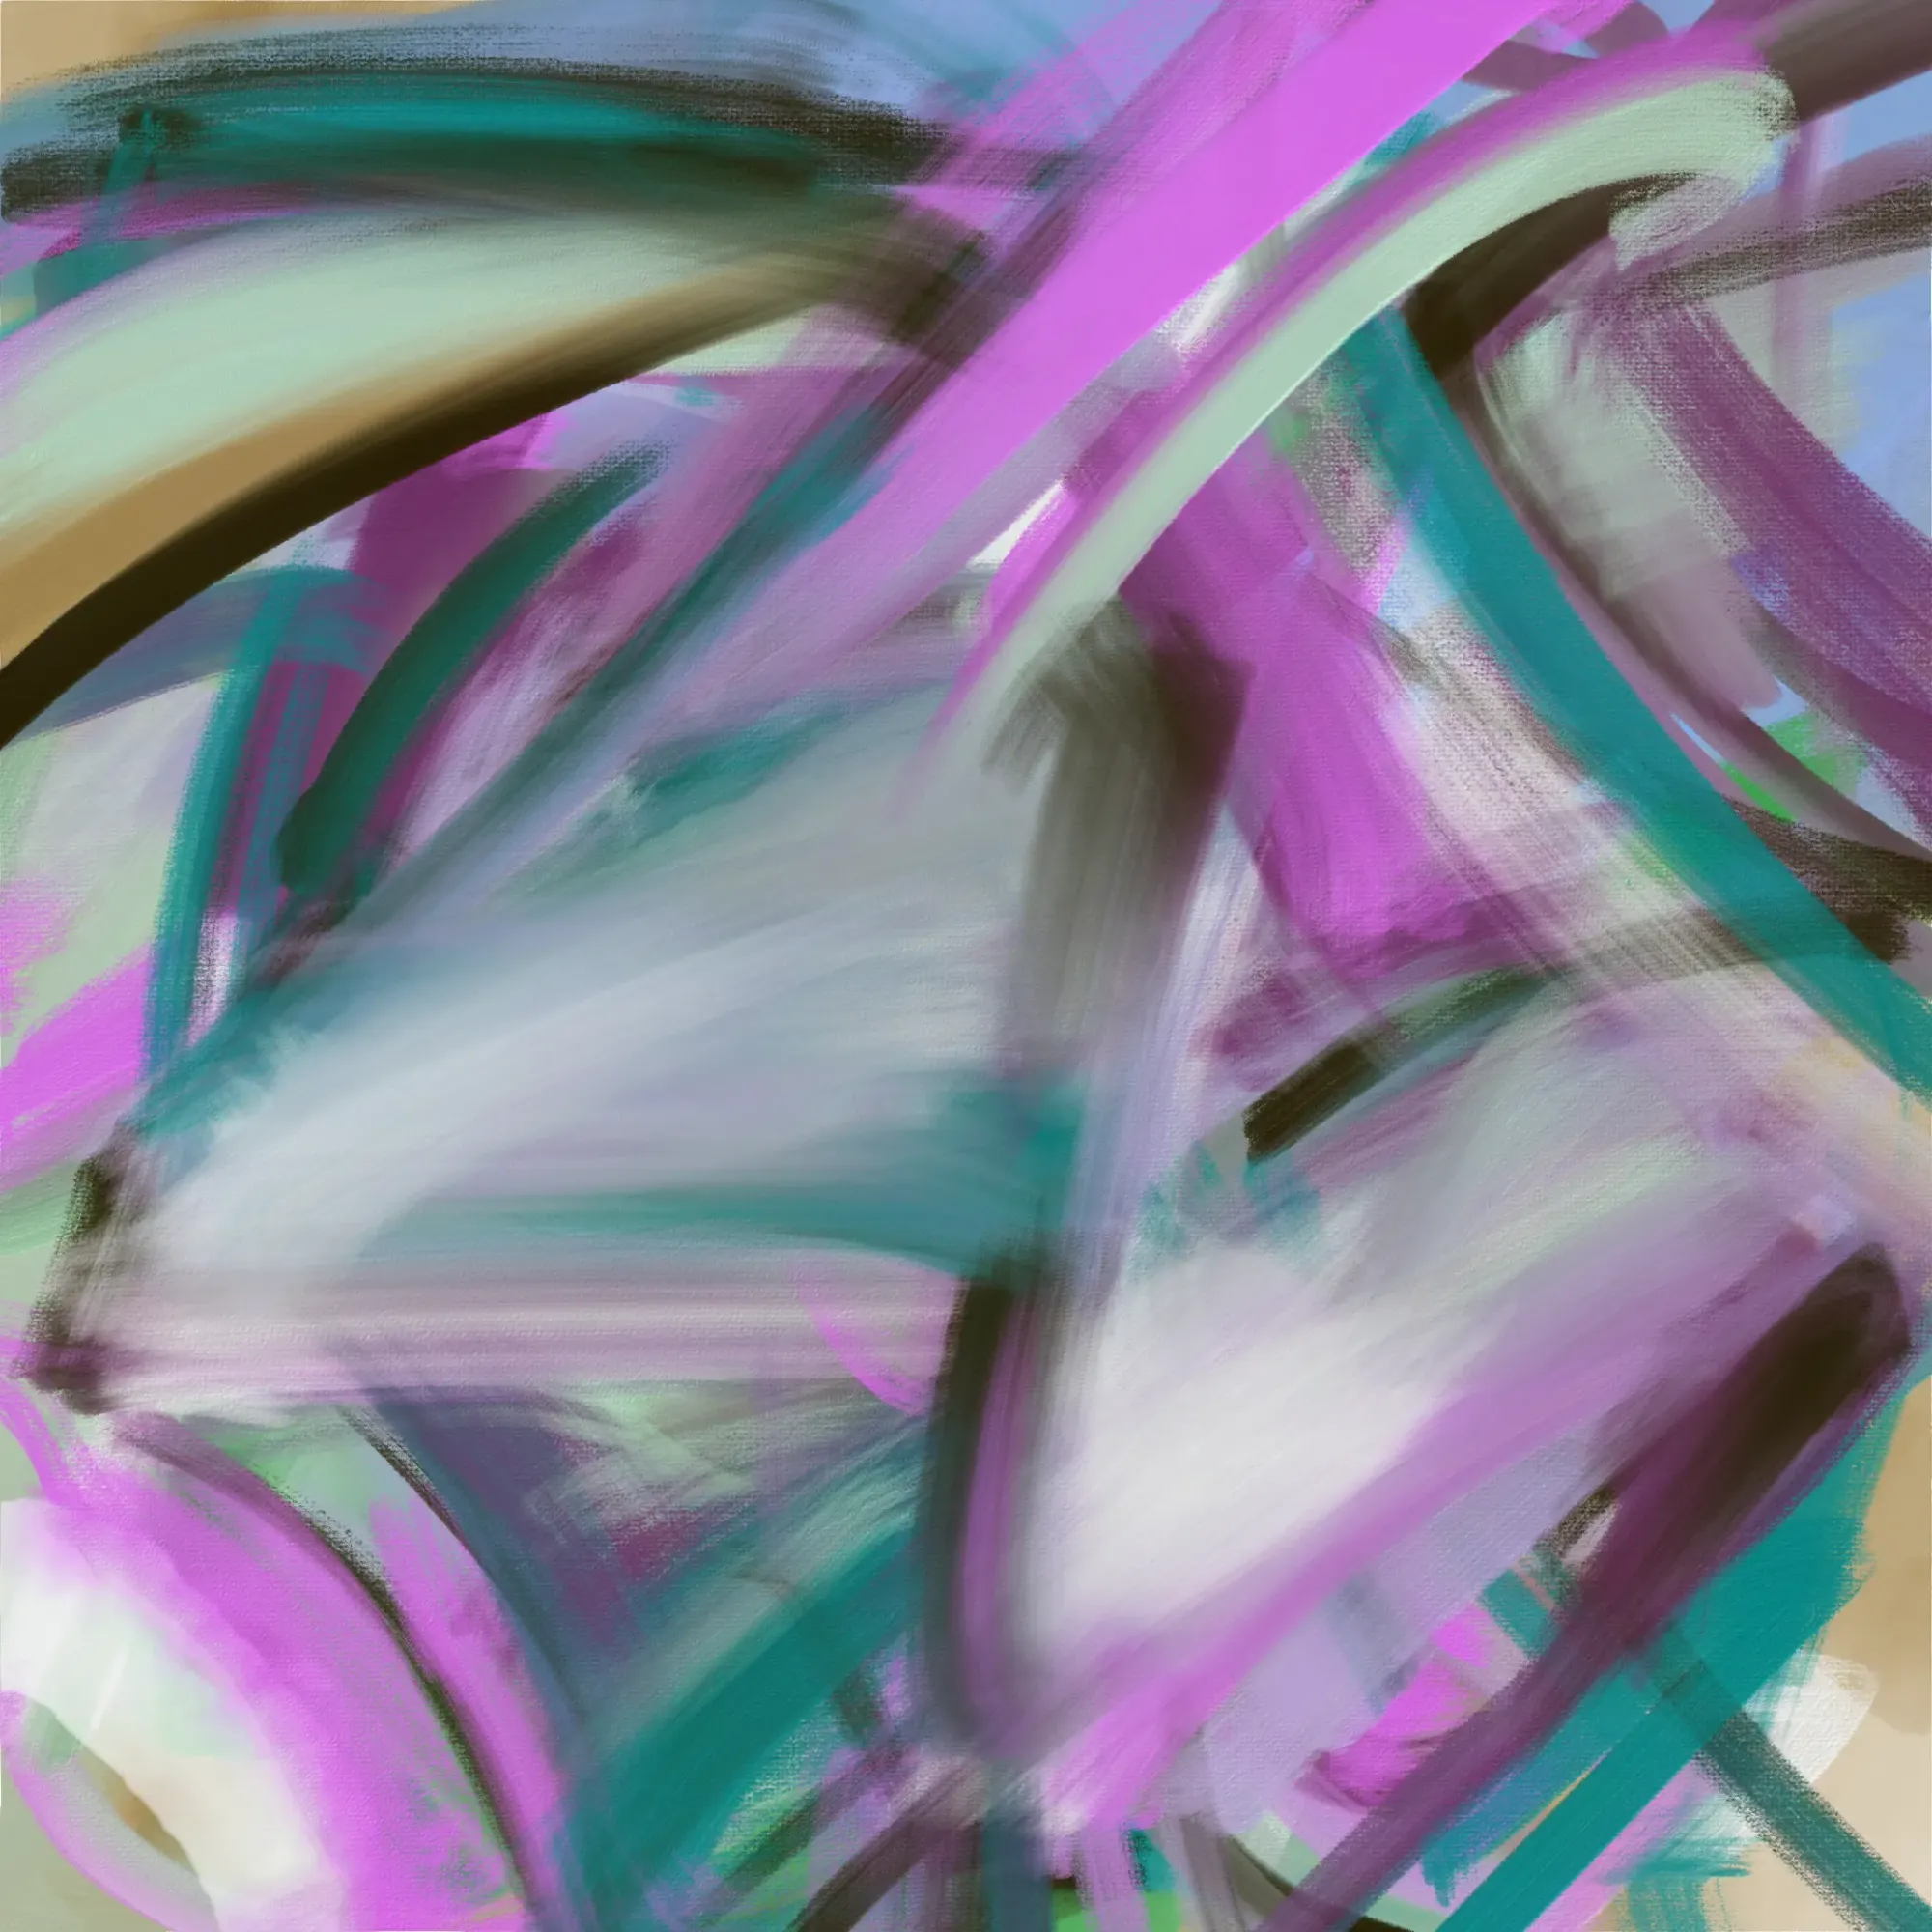 An abstract digital painting titled "Fallback 2," a square multi-colored composition.